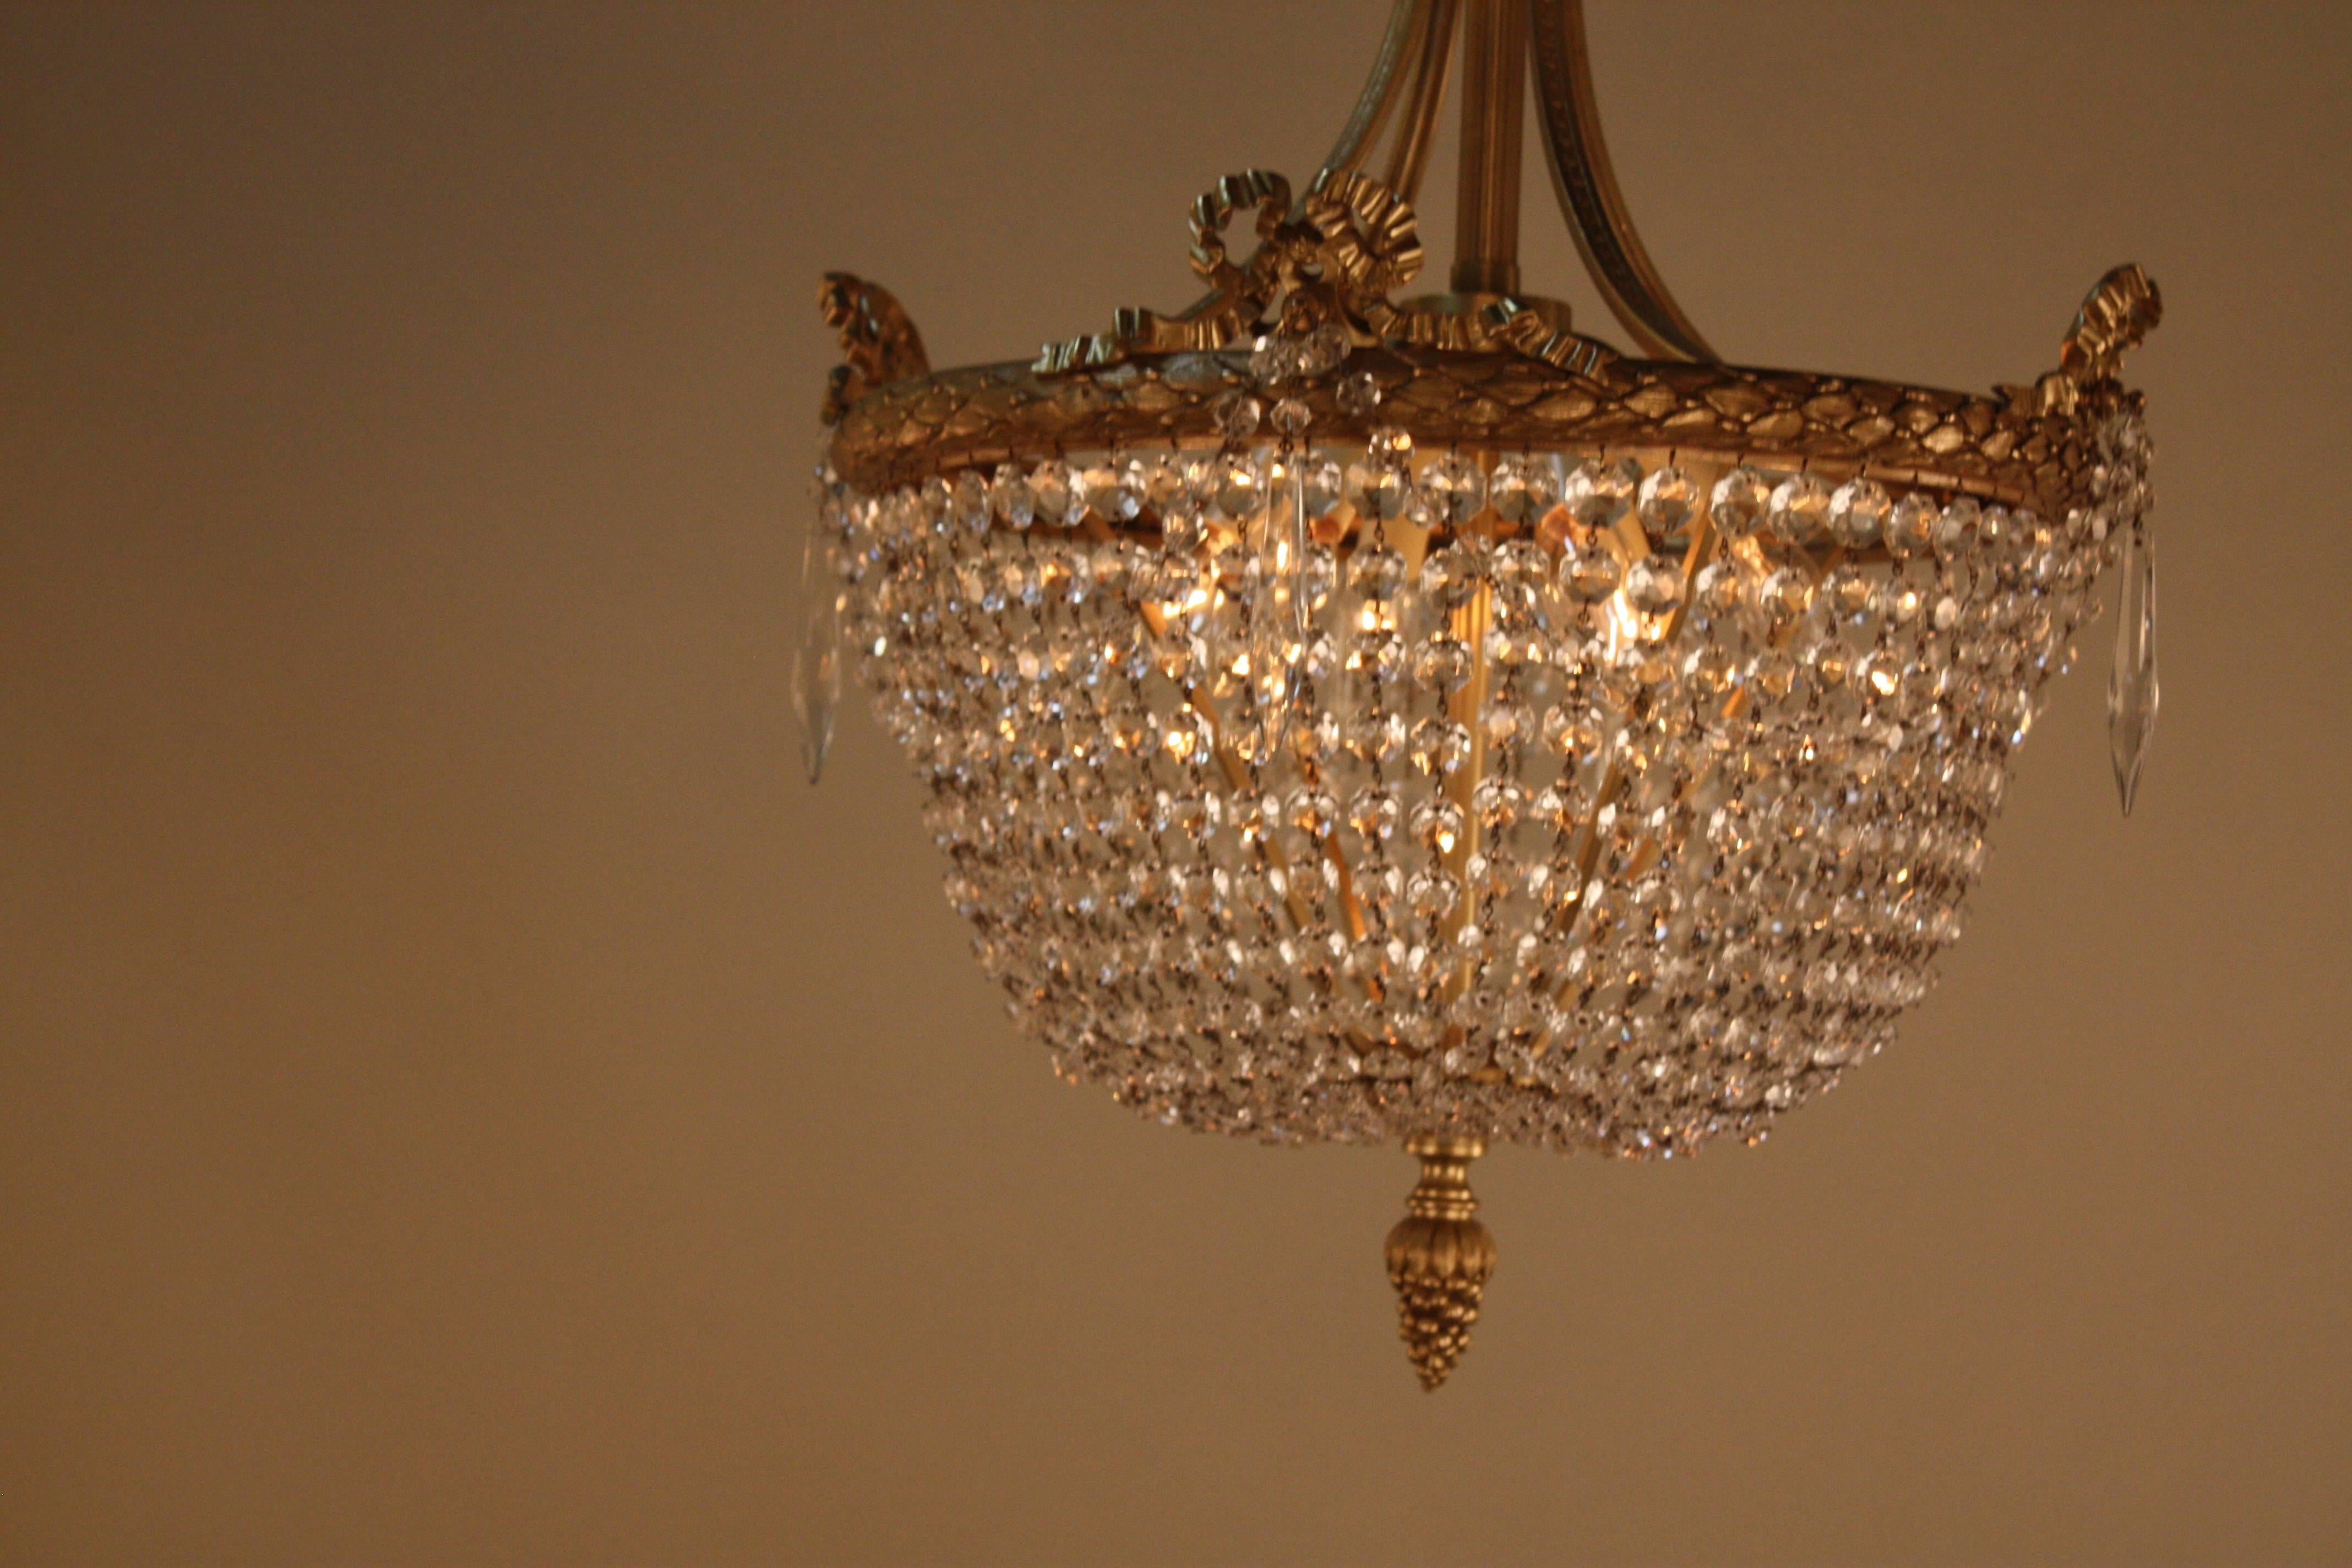 Beautifu French crystal basket with bronze chandelier.
Total of six lights 60watts each.